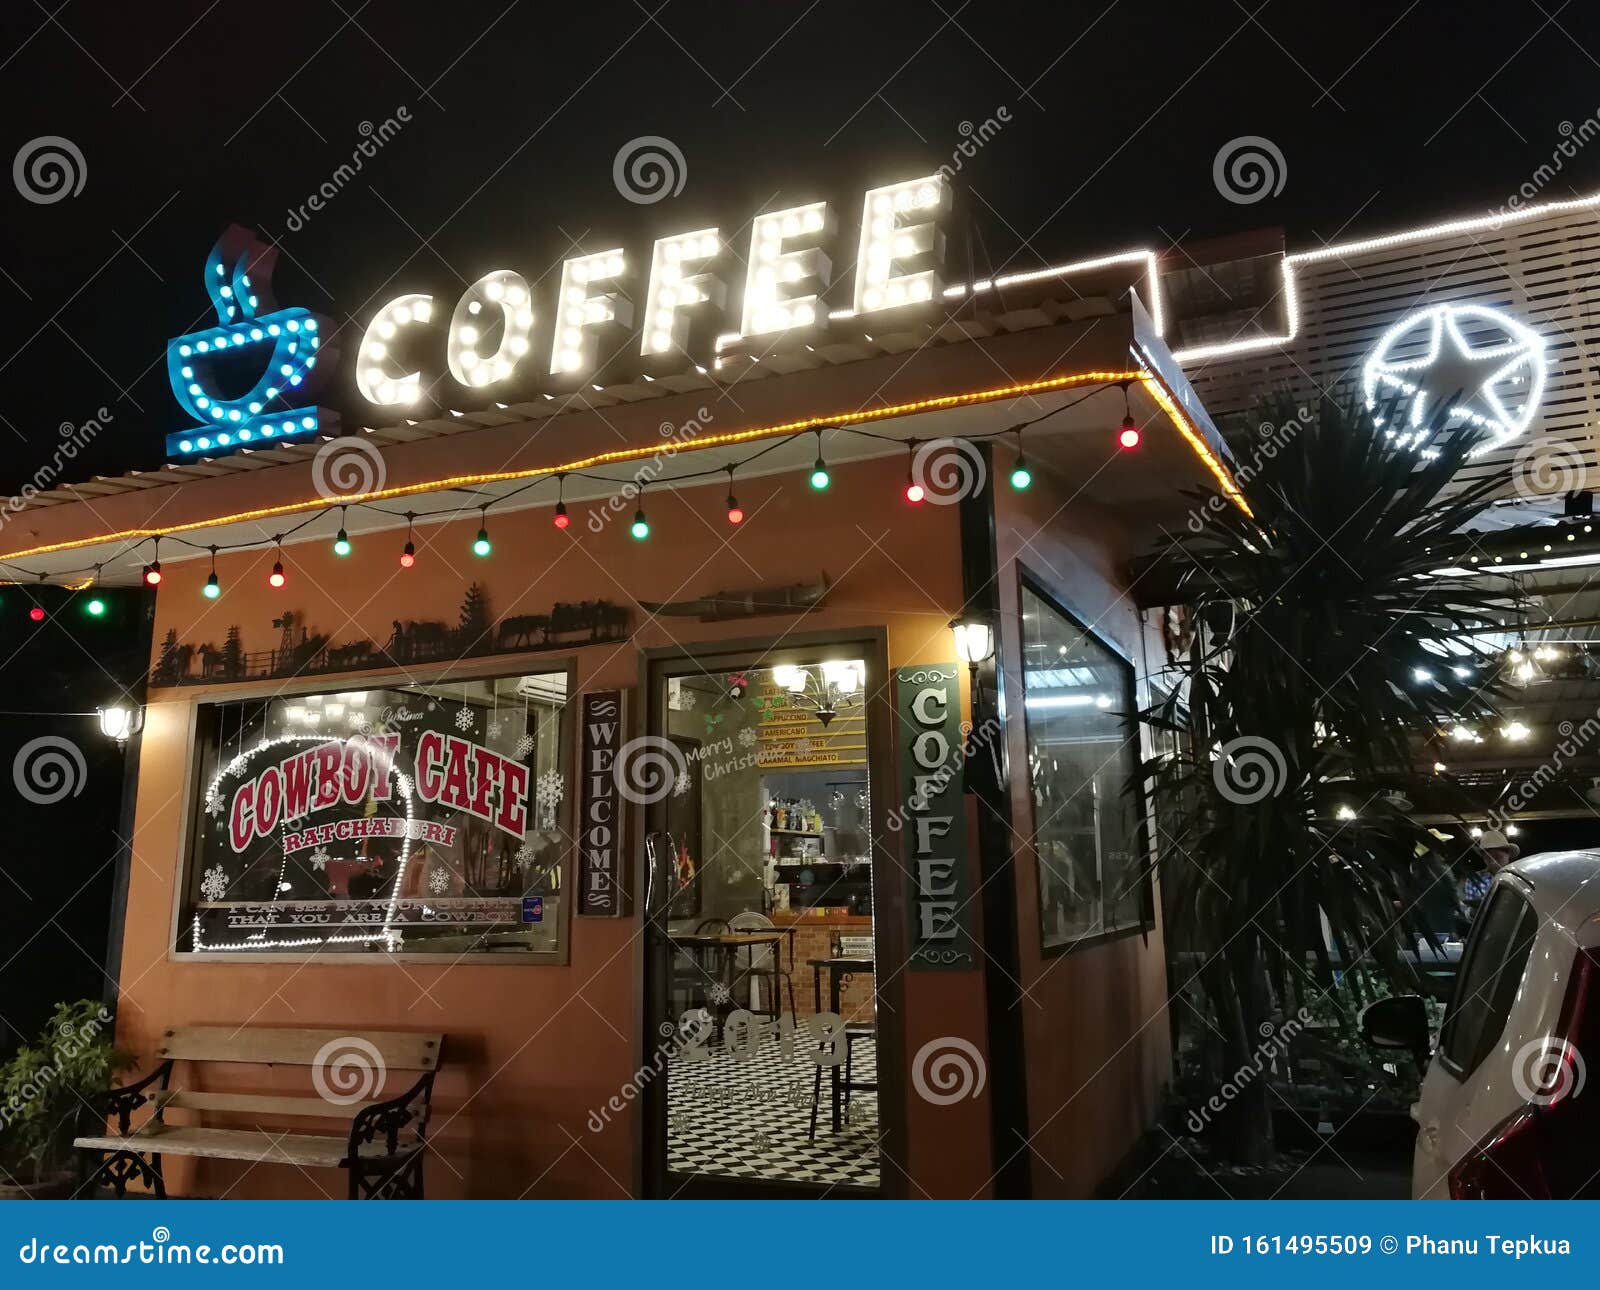 Thailand 17 Cowboy Cafe Coffee Shop And Restaurant Editorial Stock Image Image Of Roof Restaurant